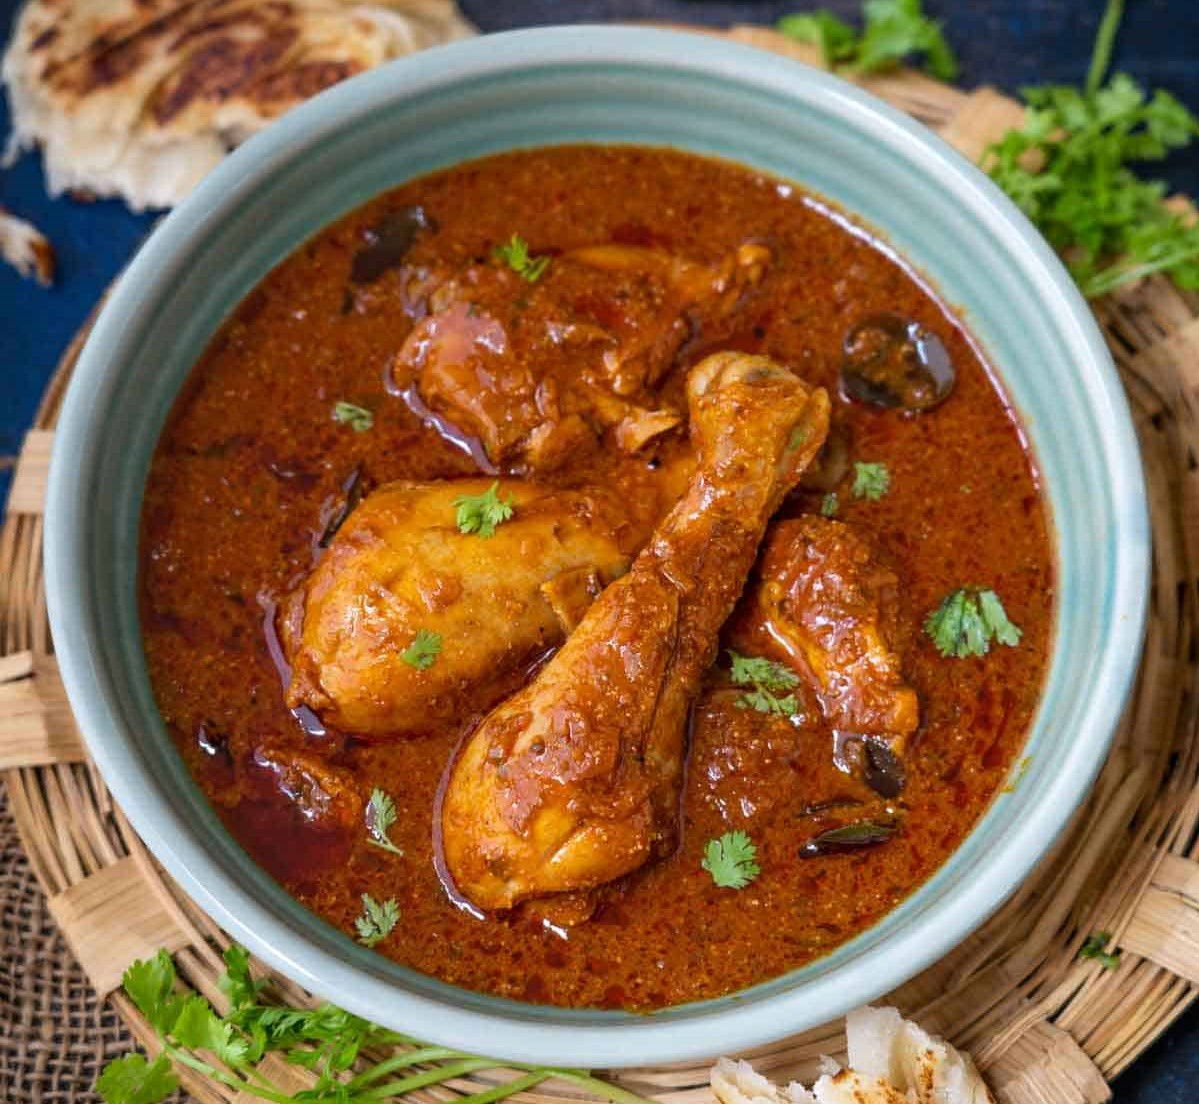 Andhra Chicken Curry: A flavourful dish representing authentic Andhra cuisine.